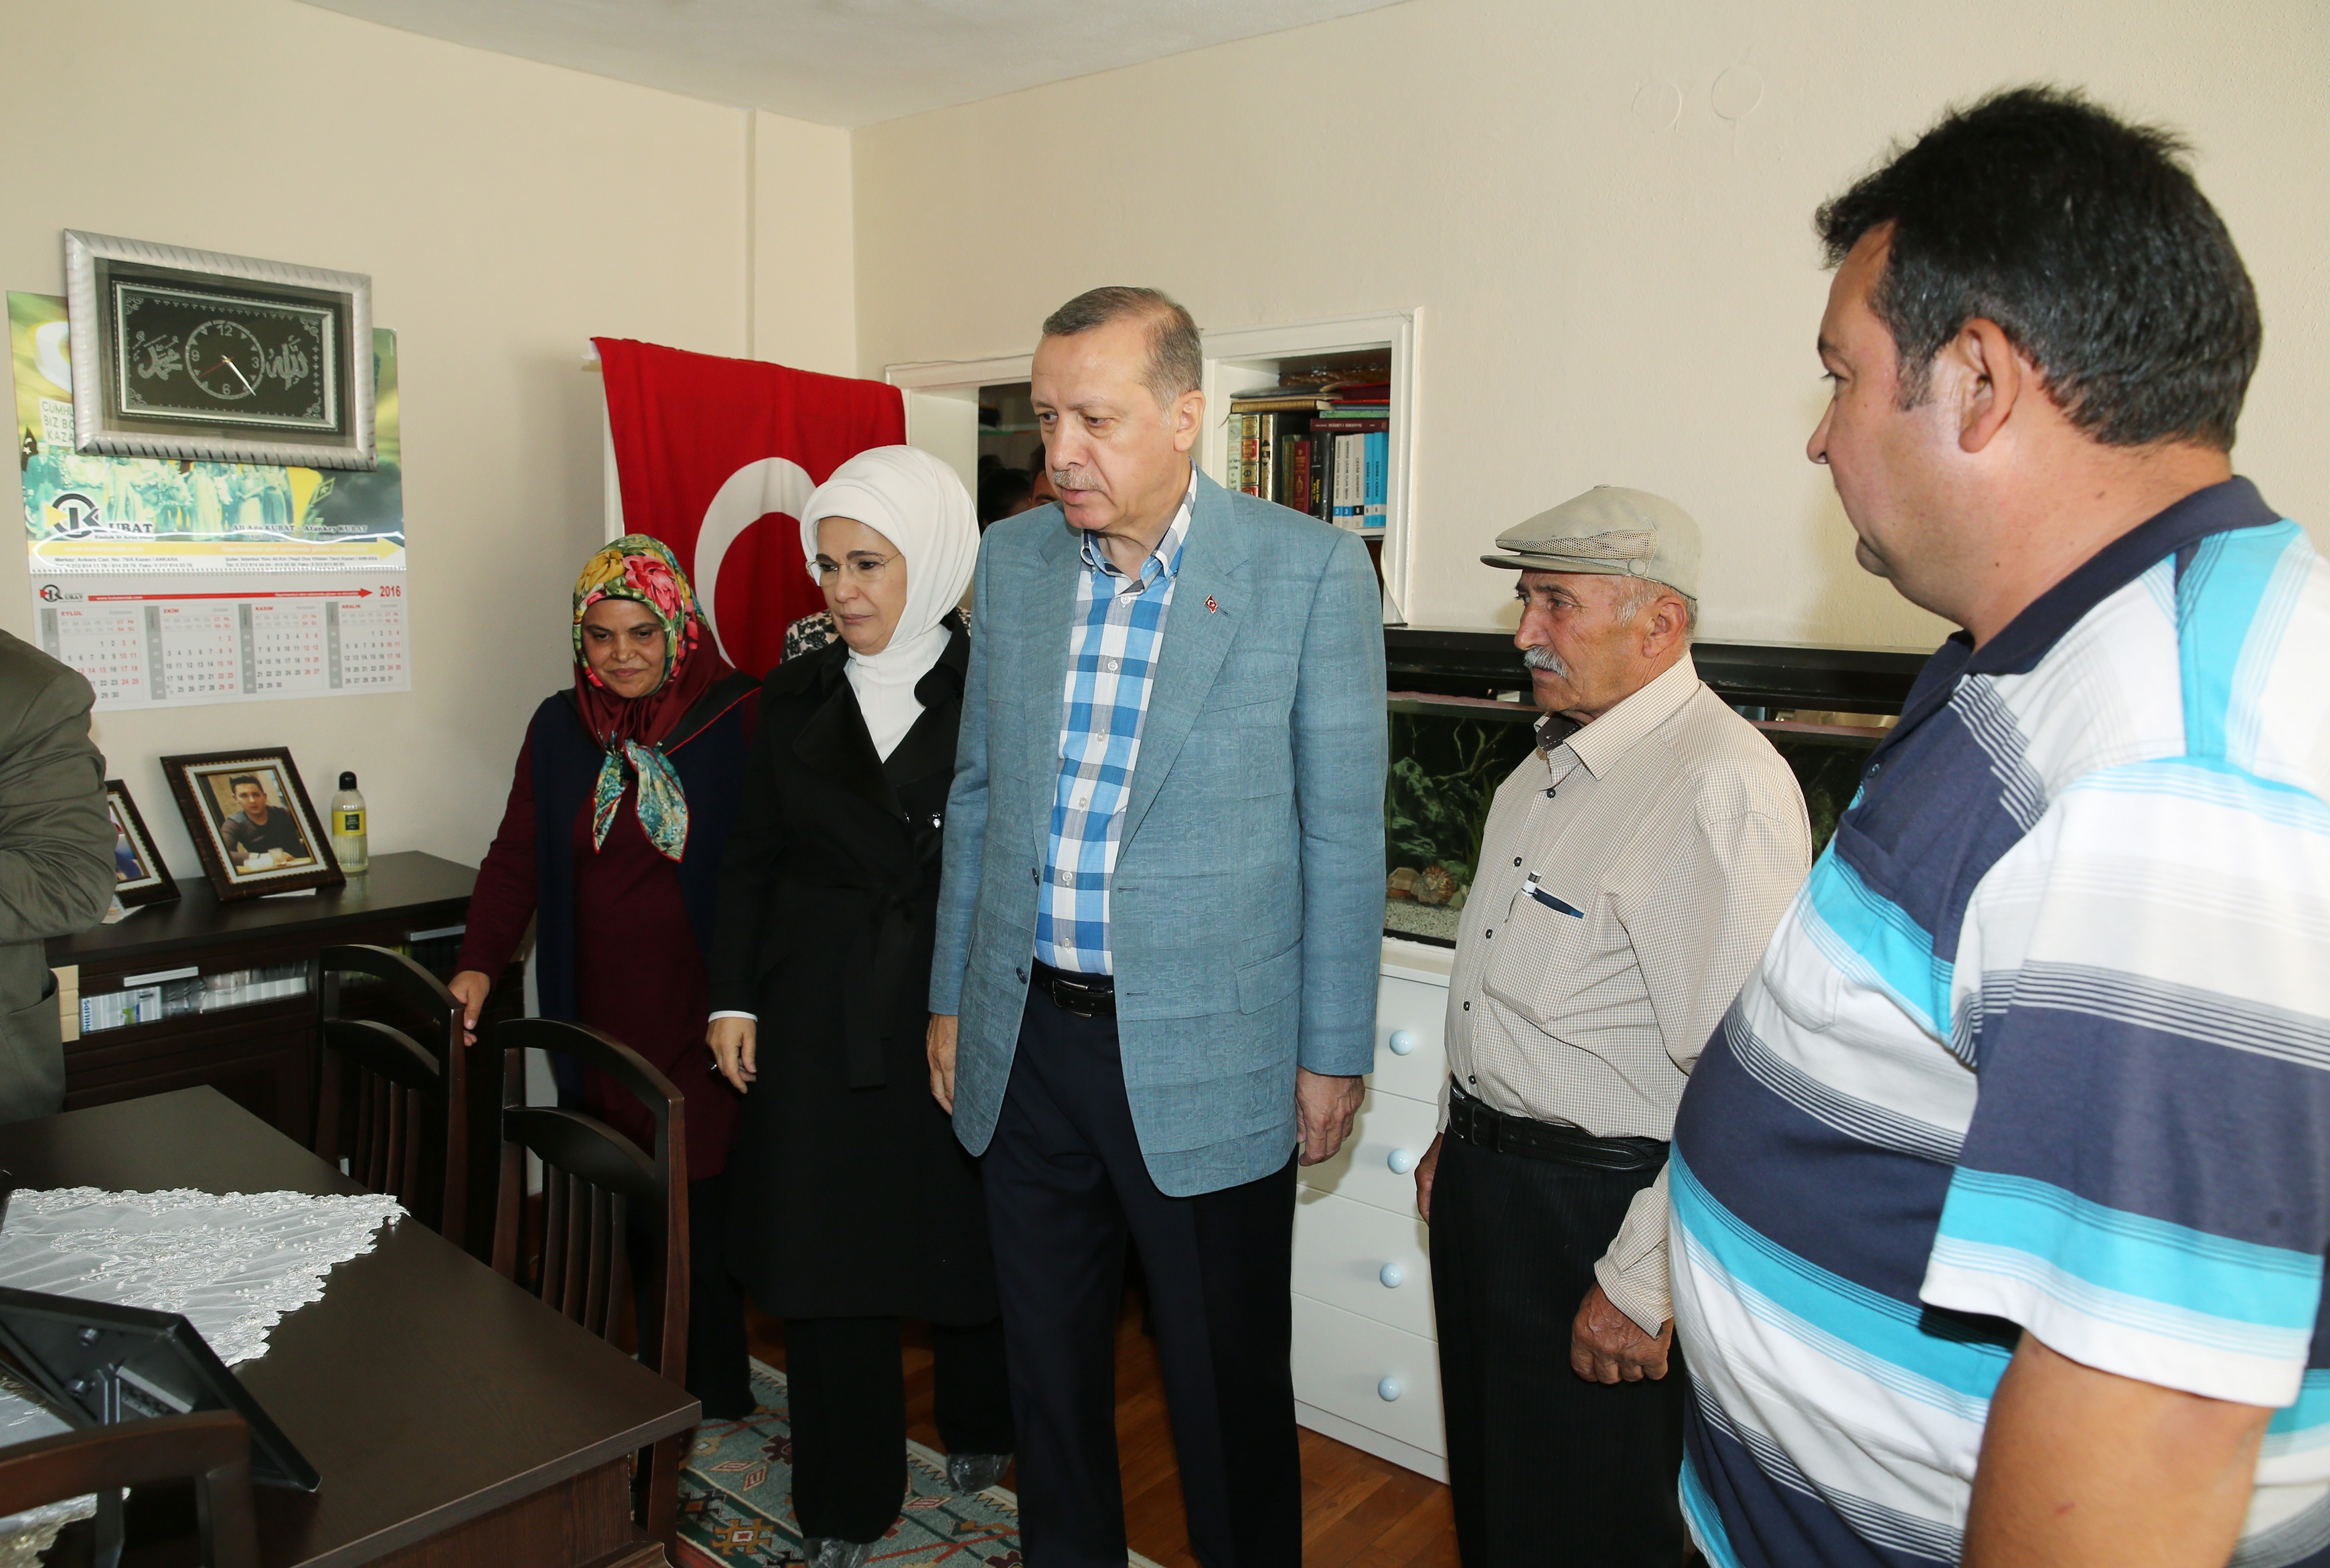 The Erdoğans paid a visit to family of Ömer Takdemir, who died a martyr during the July 15 coup attempt in the Kazan district of Ankara.